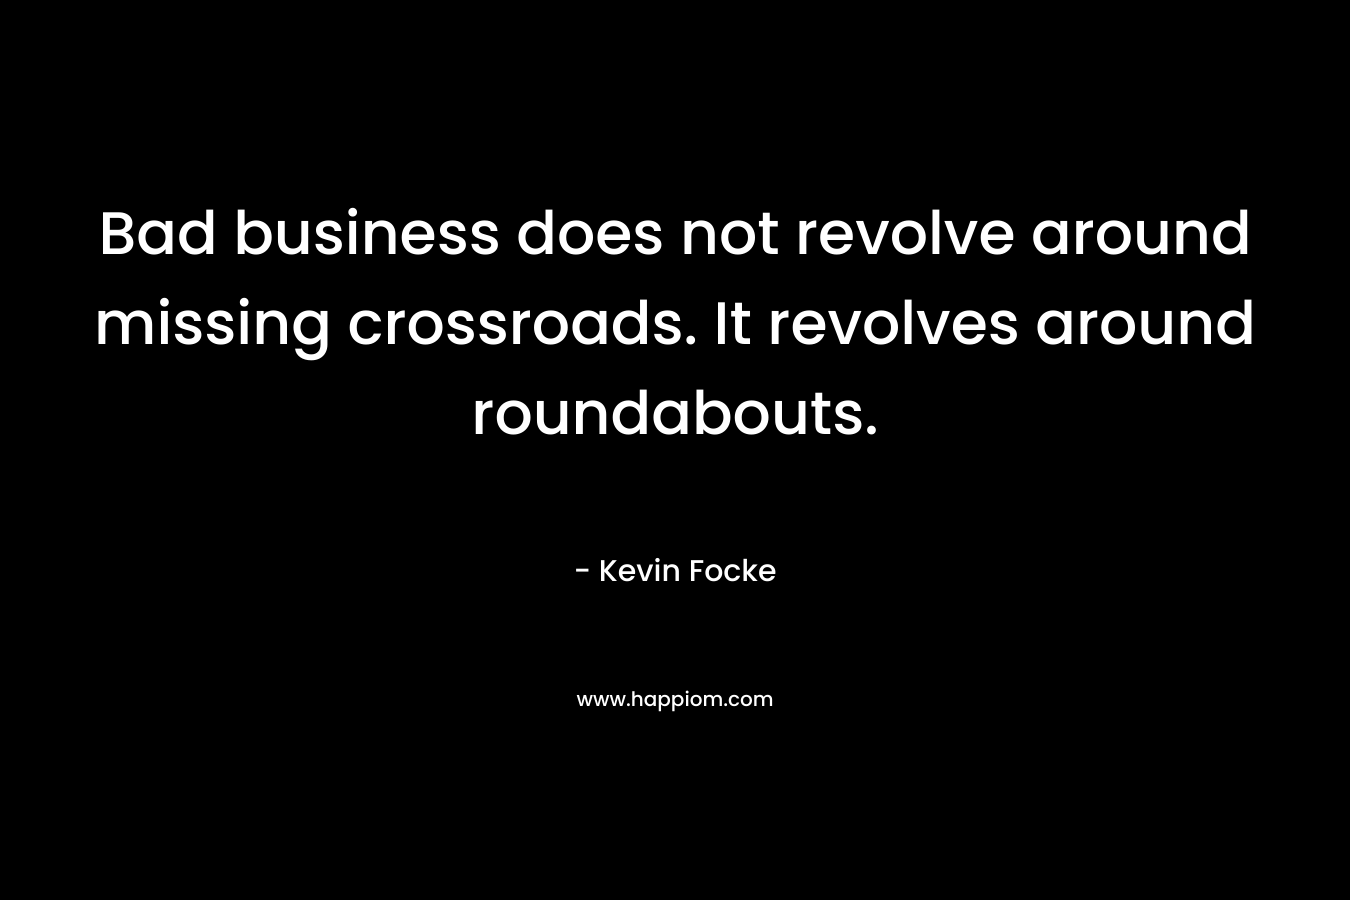 Bad business does not revolve around missing crossroads. It revolves around roundabouts. – Kevin Focke